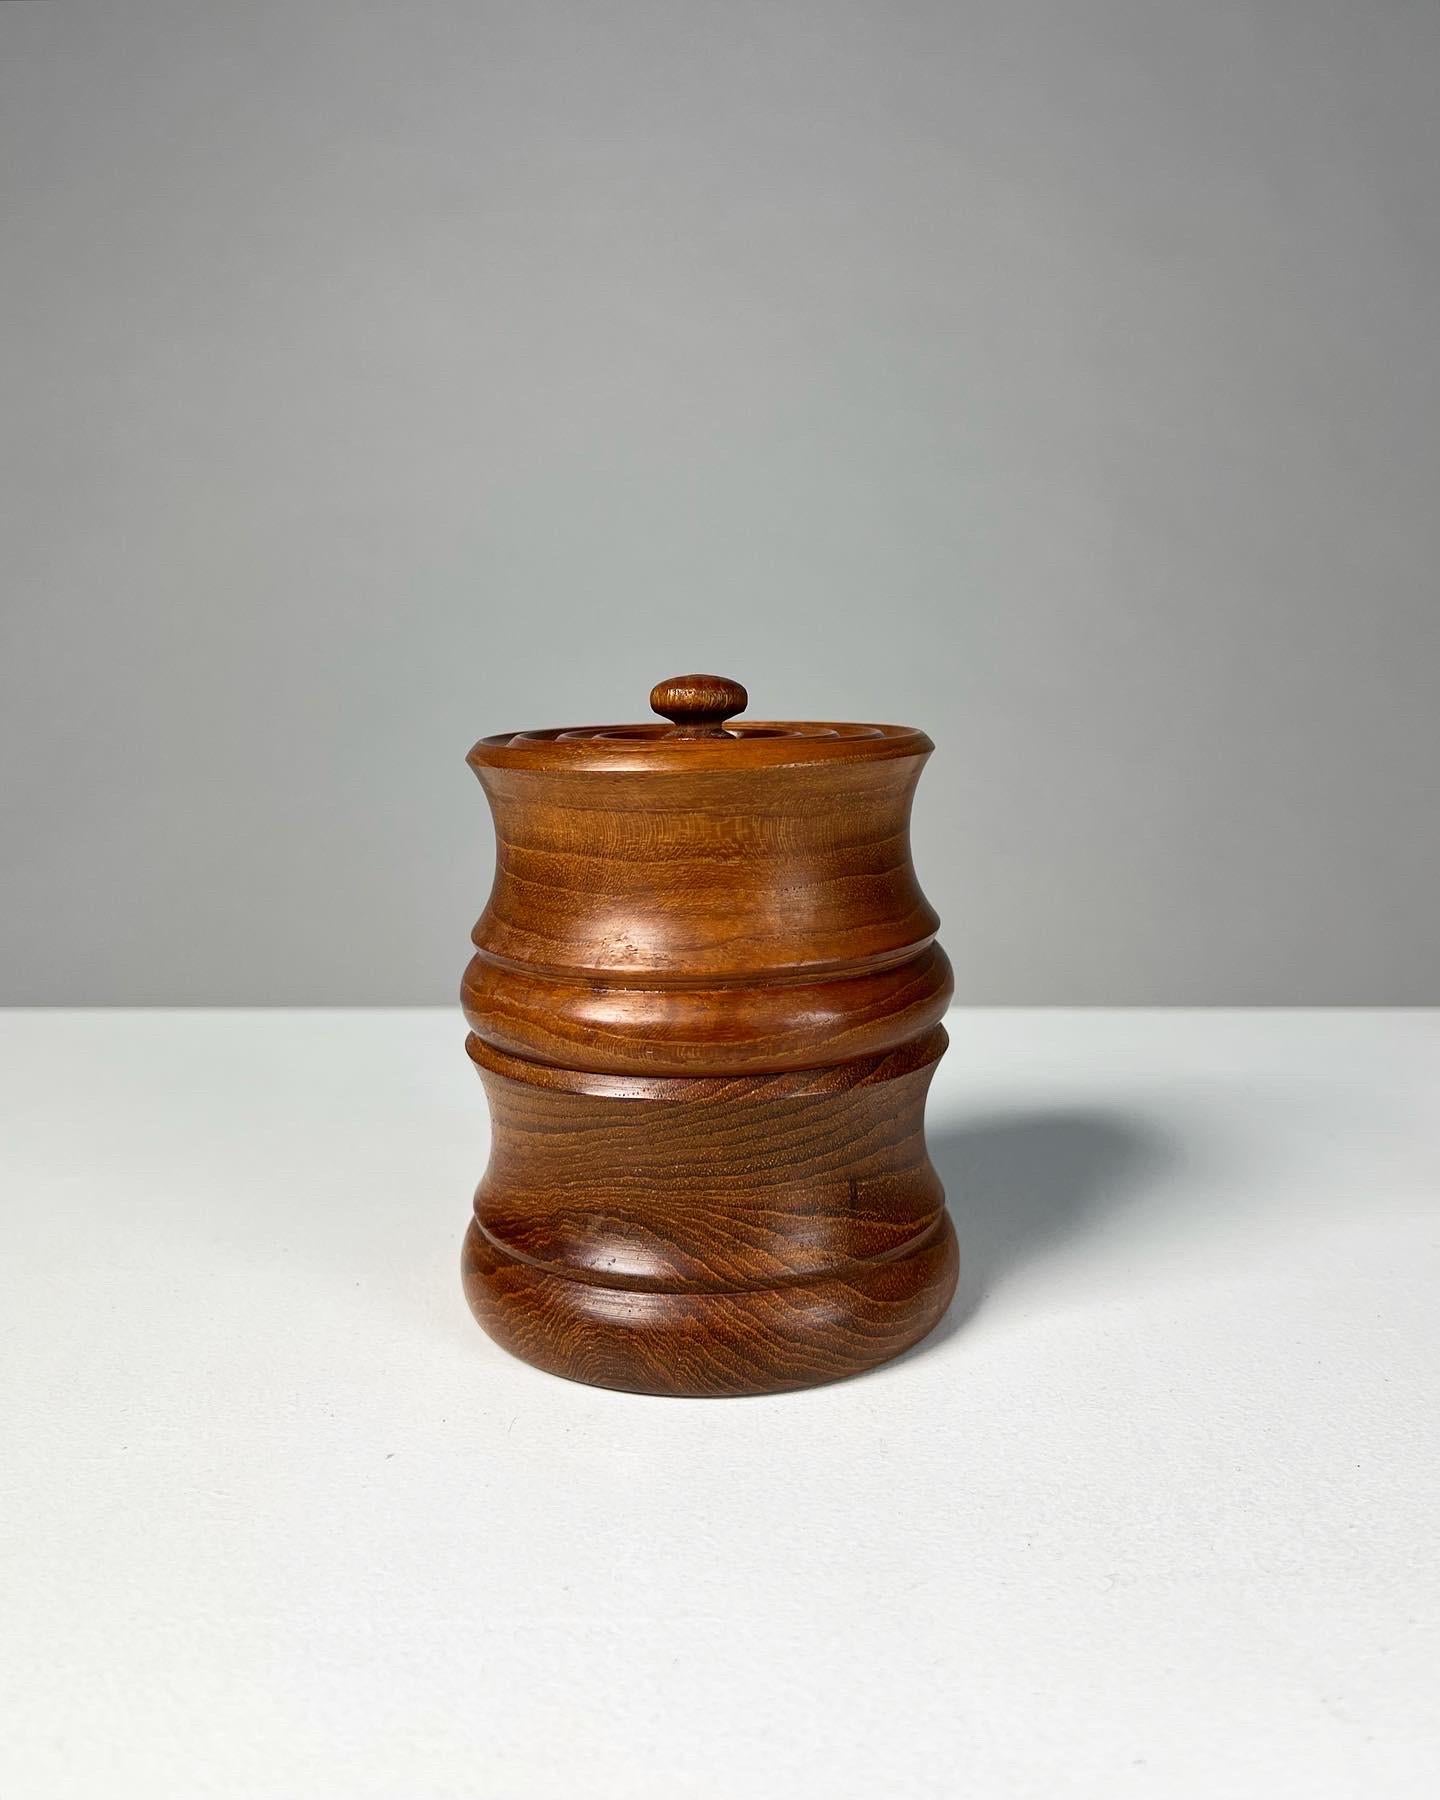 Pepper mill with integrated salt shaker by Nissen, Denmark in the 1960s.
Made of solid teak.

The salt can be filled in on top, the pepper on the bottom.
The stainless steel mill was made by Peugeot for Nissen.

Height: 12 cm
Diameter: 9 cm.